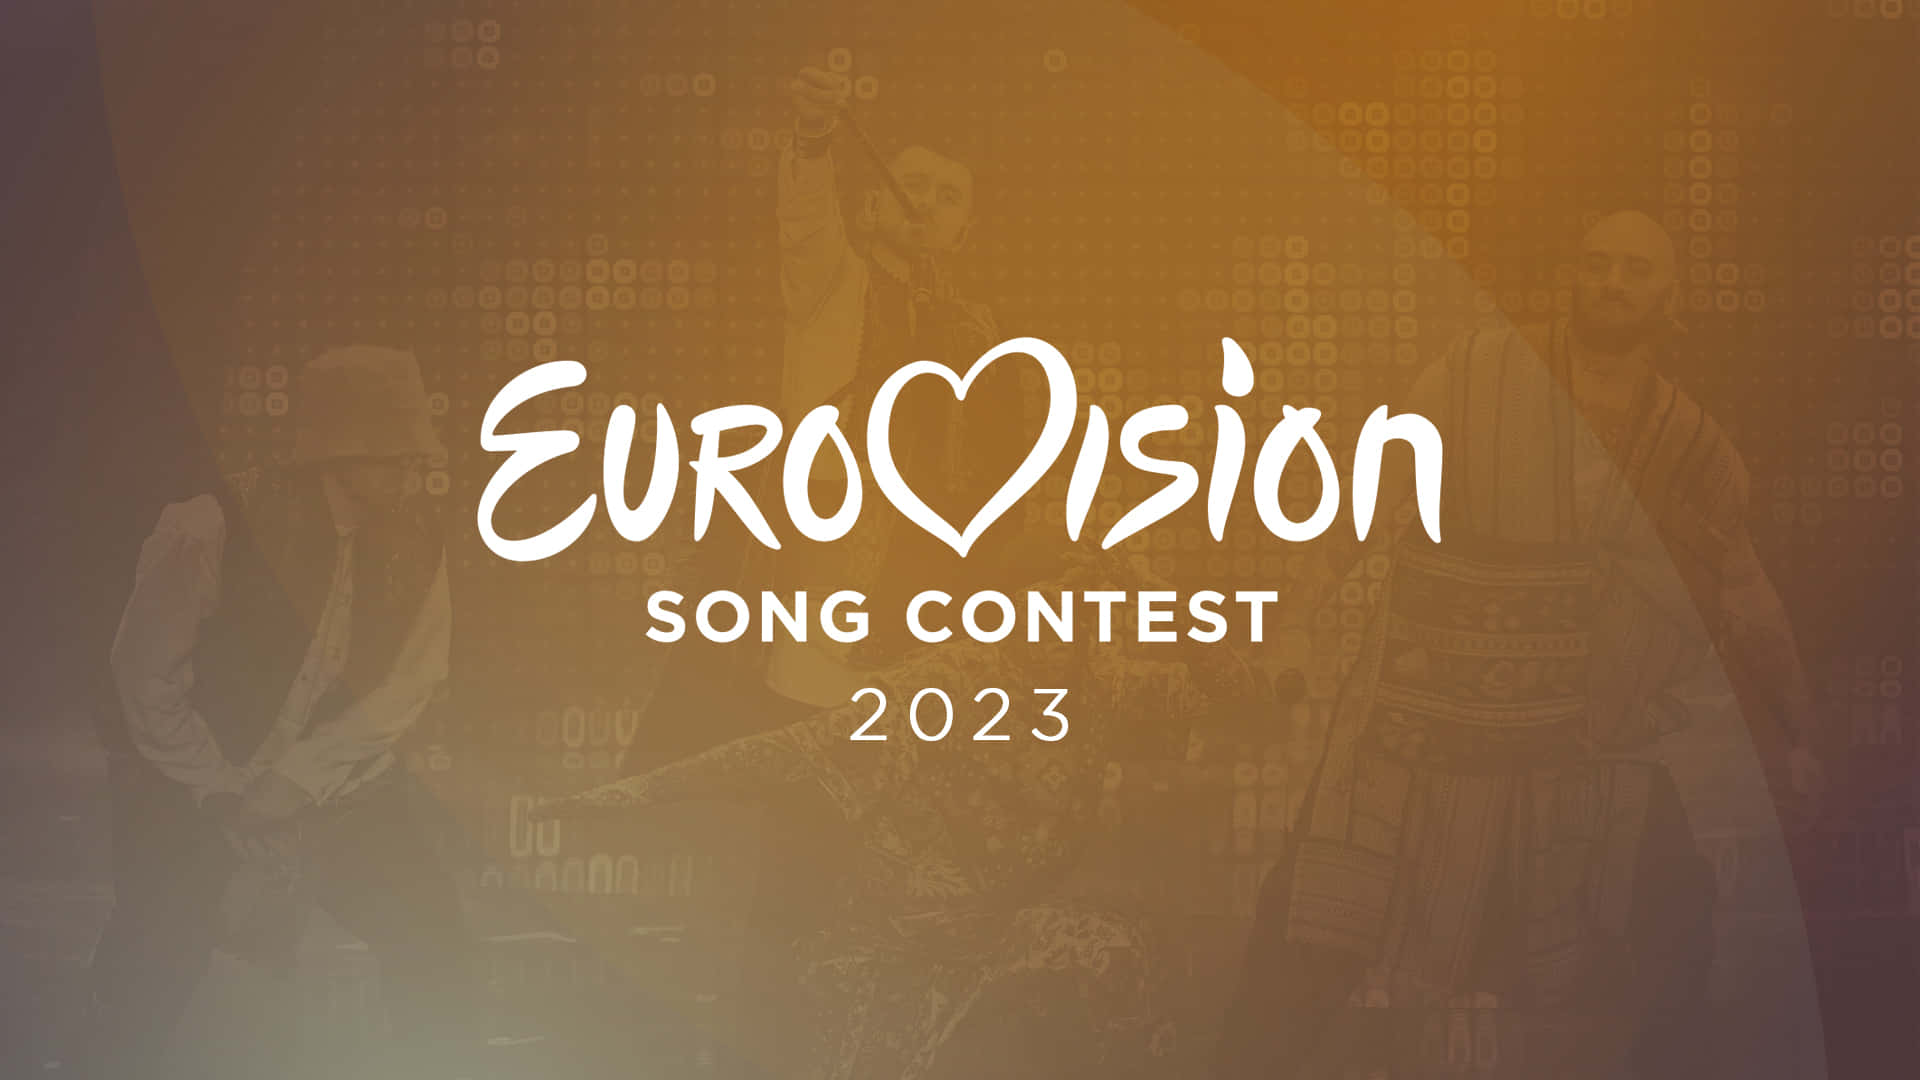 Eurovision 2023 - The annual entertainment and song contest continues its strong tradition of presenting electrifying music and performances from across Europe. Wallpaper